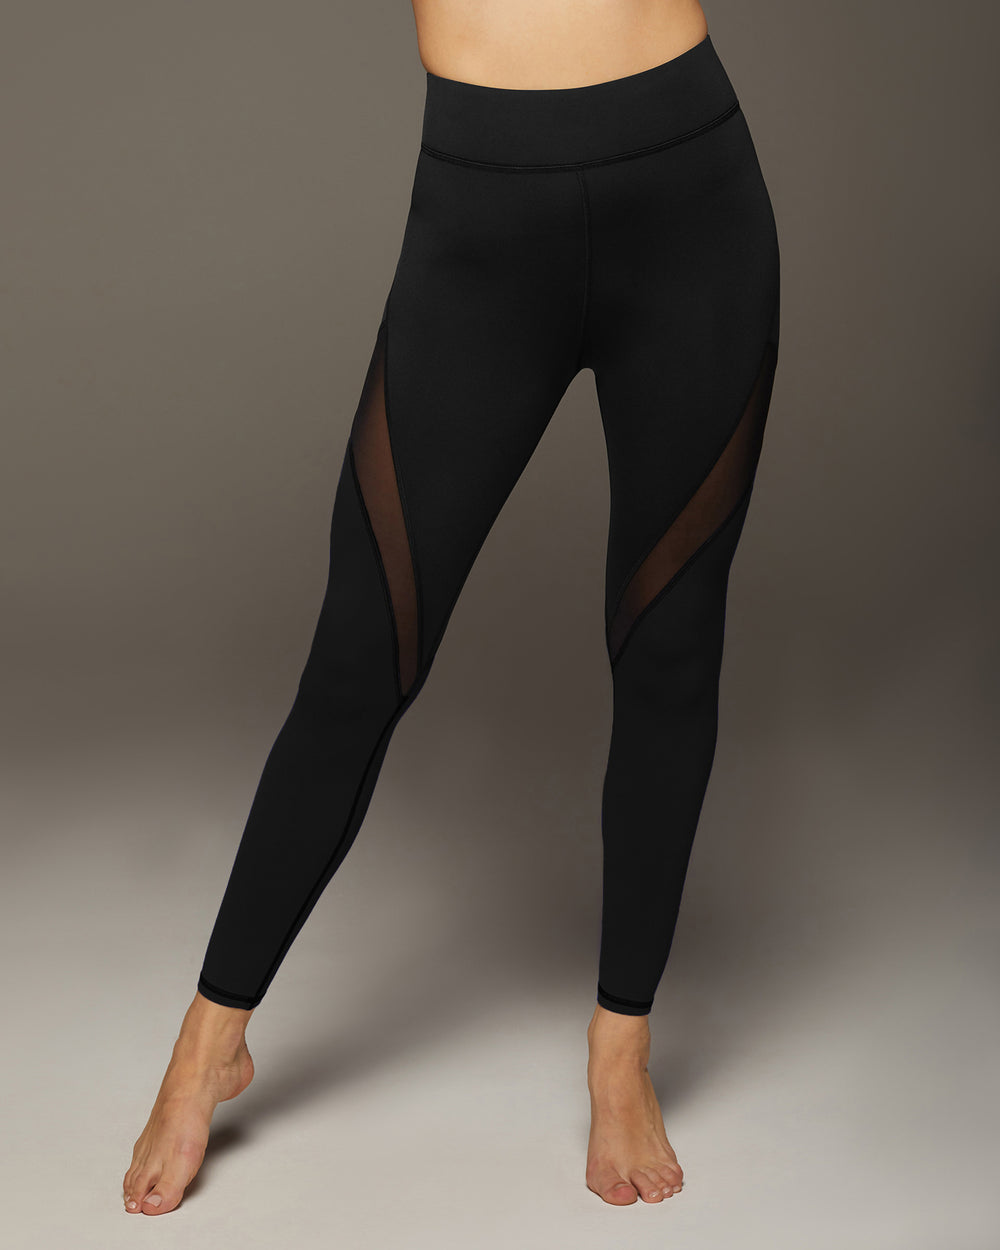 Women's Buttery Soft Activewear Leggings (XS only) - Wholesale 